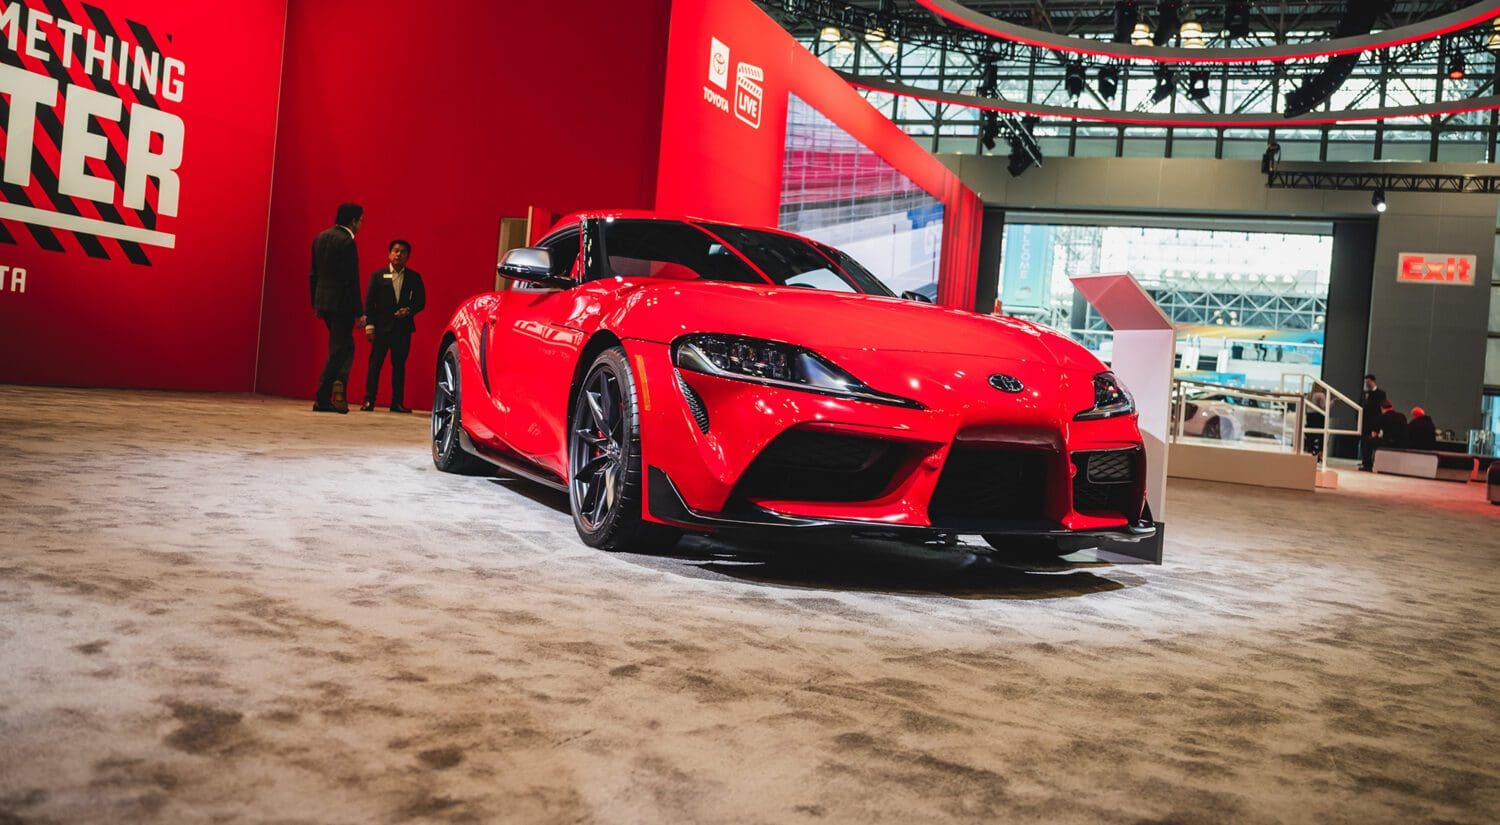 Focusing on the good (bye) at the New York International Auto Show